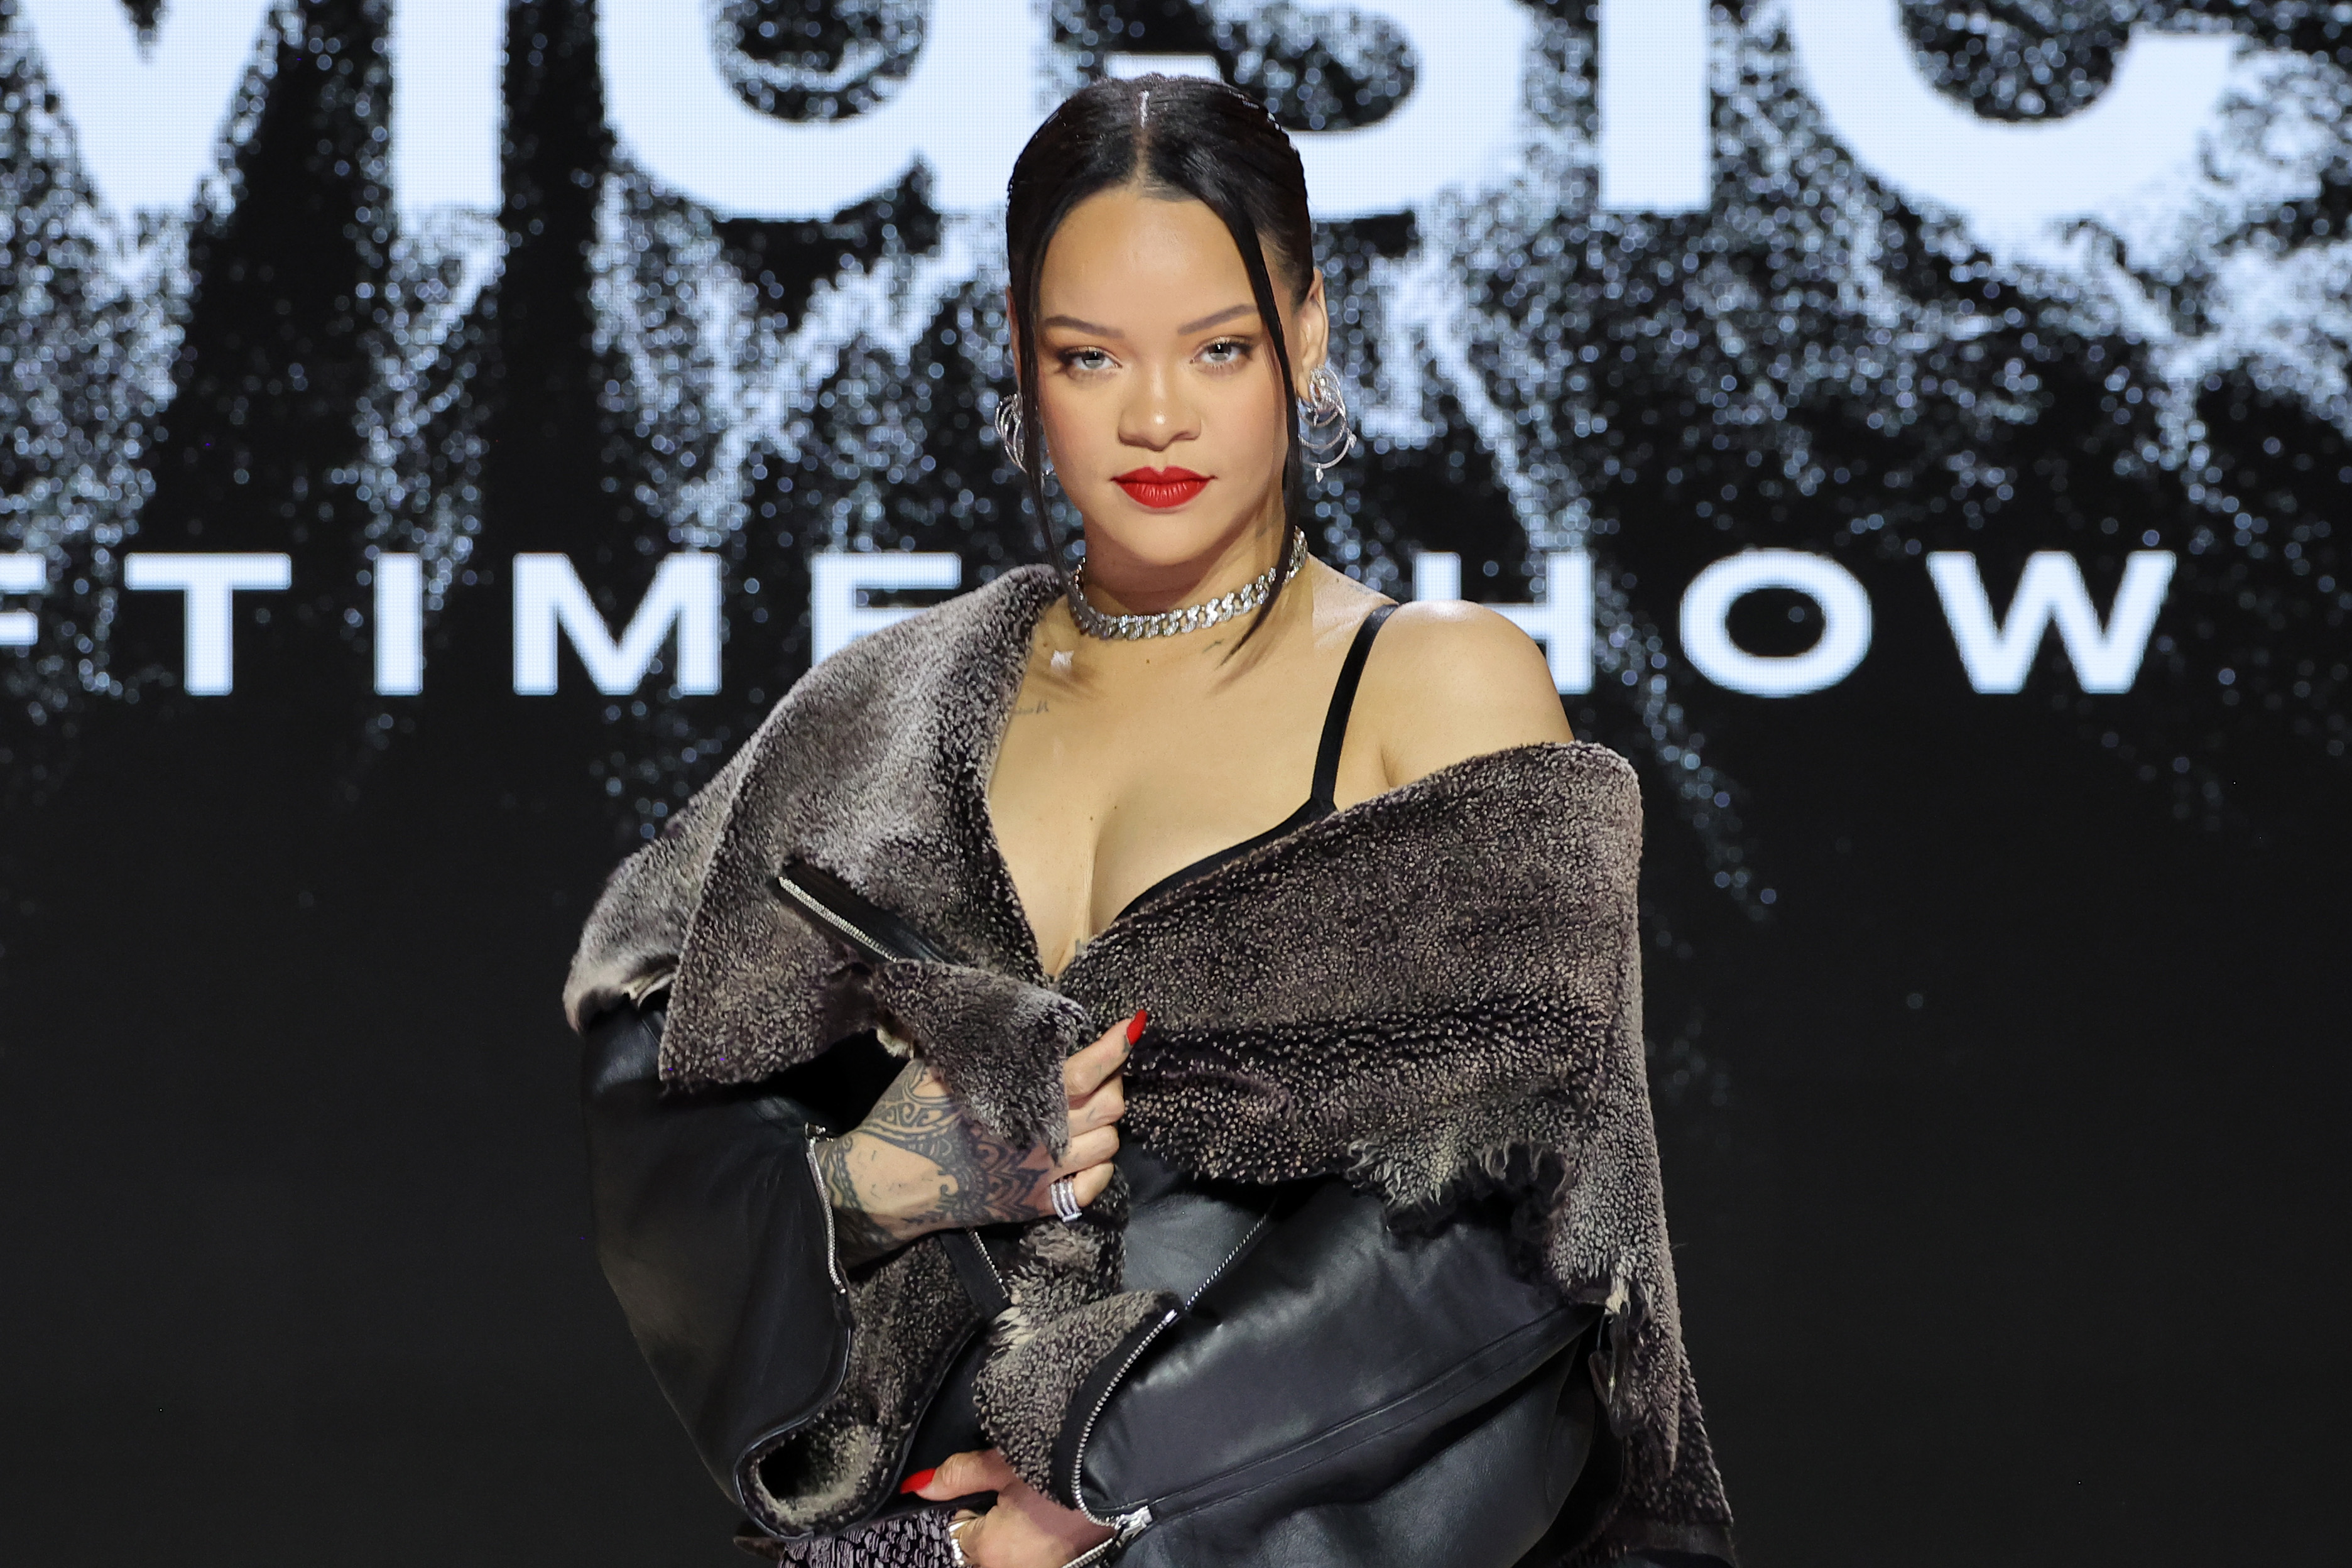 Super Bowl 2023: How to Watch & Buy Tickets to Rihanna's Halftime